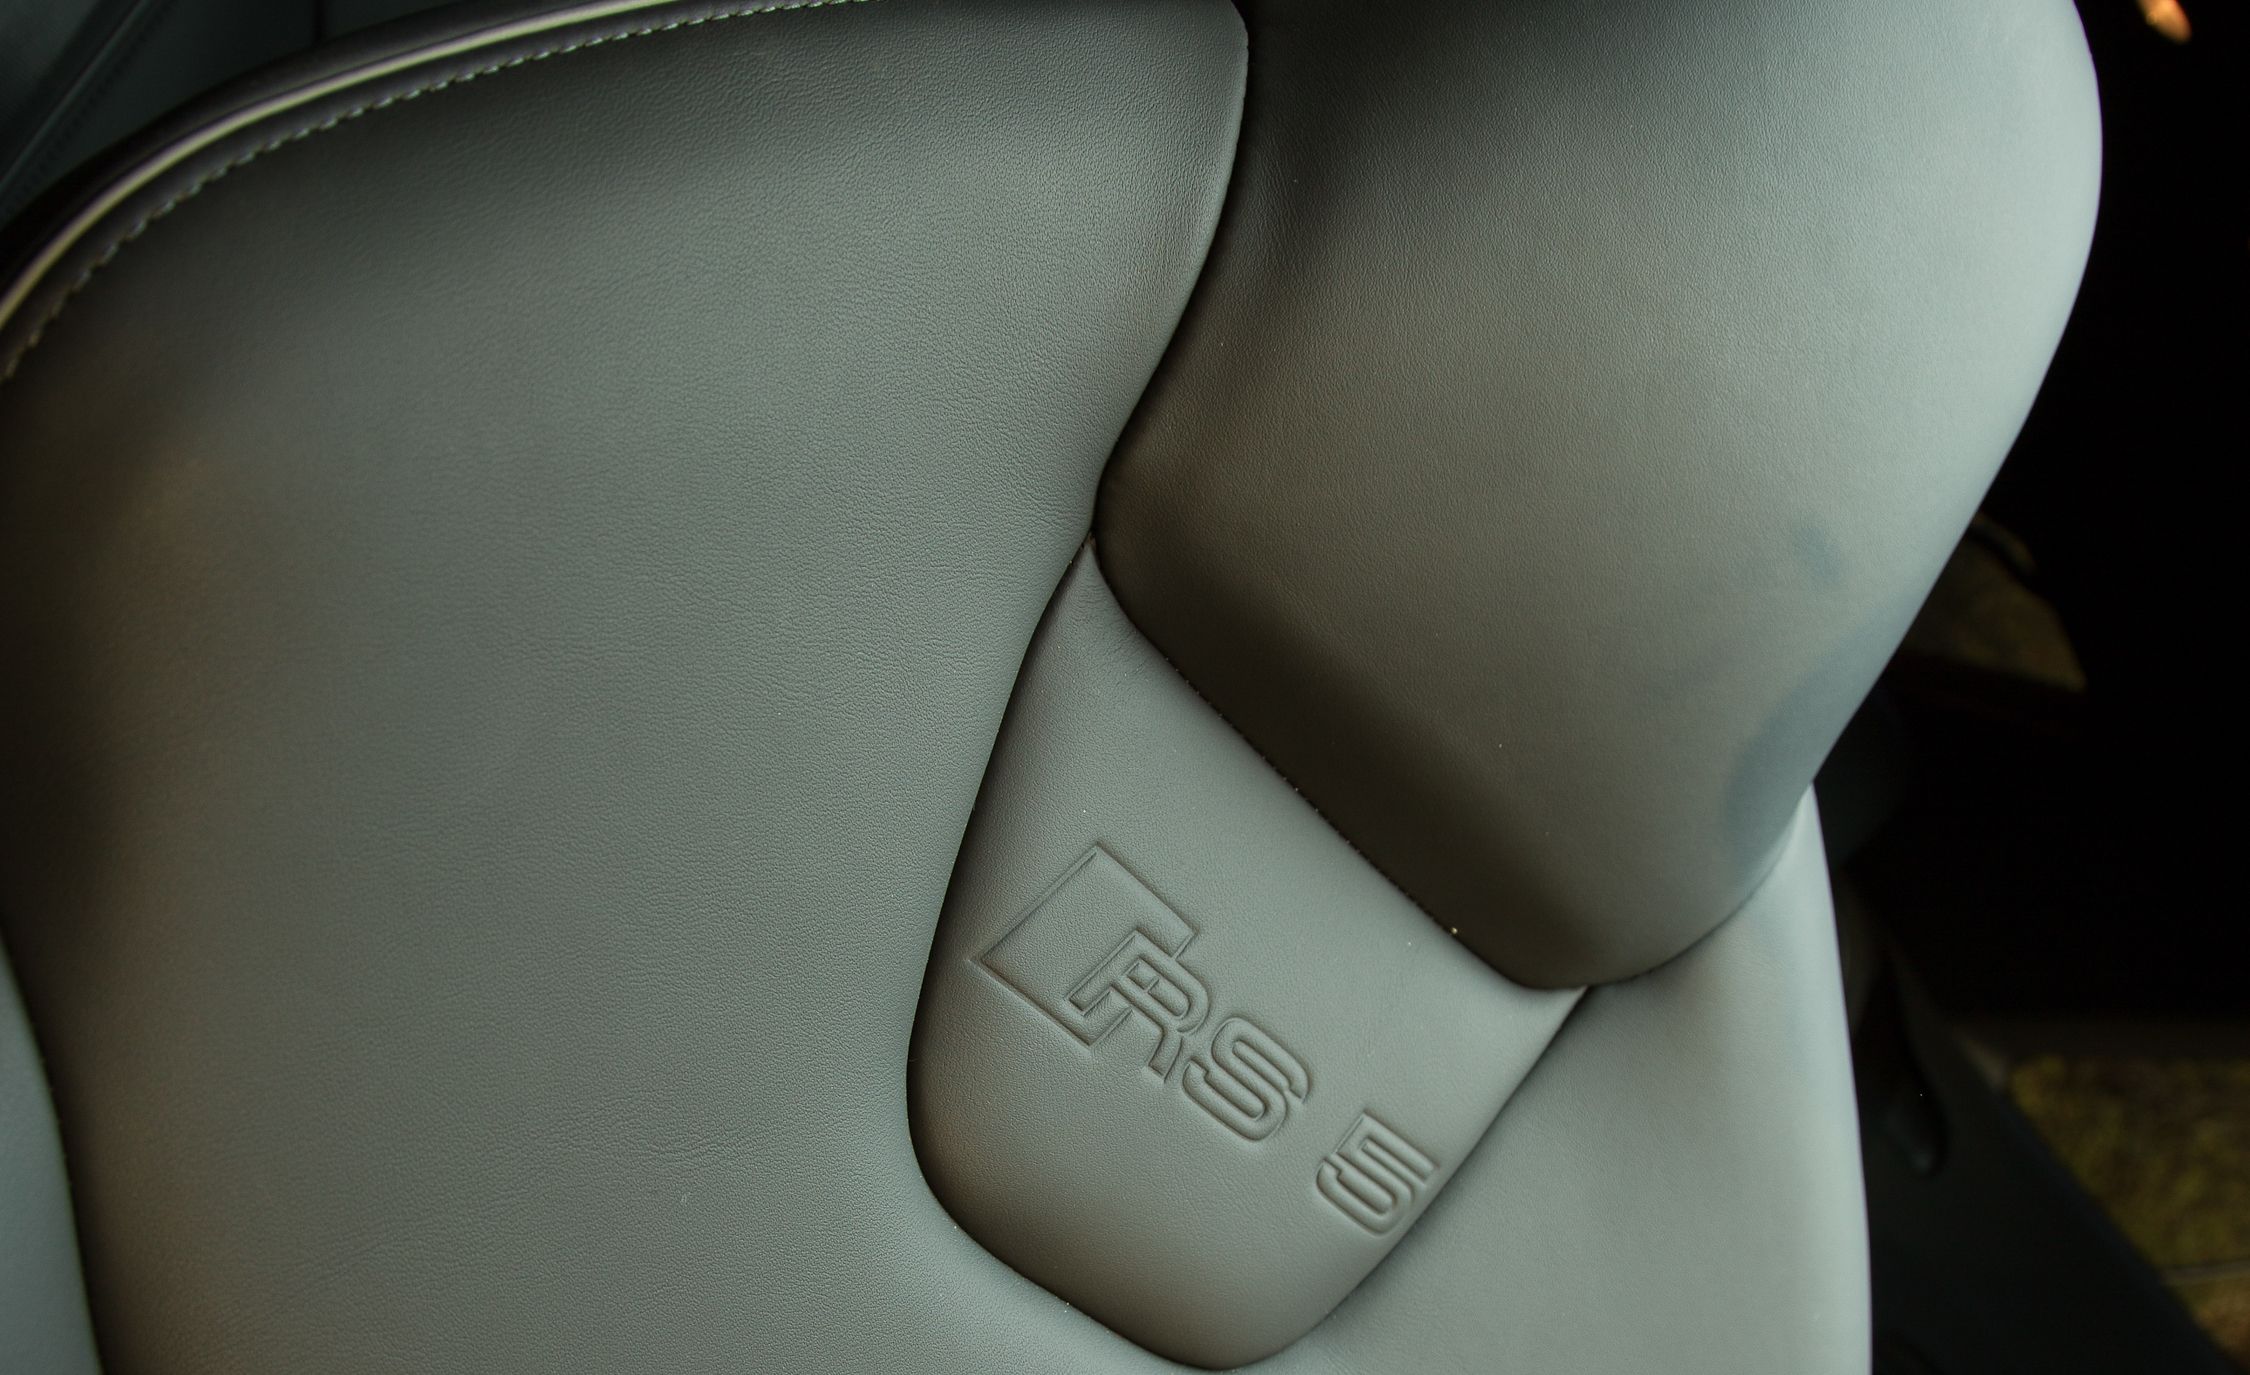 2013 Audi Rs 5 Interior Seats Leather Details (View 1 of 41)